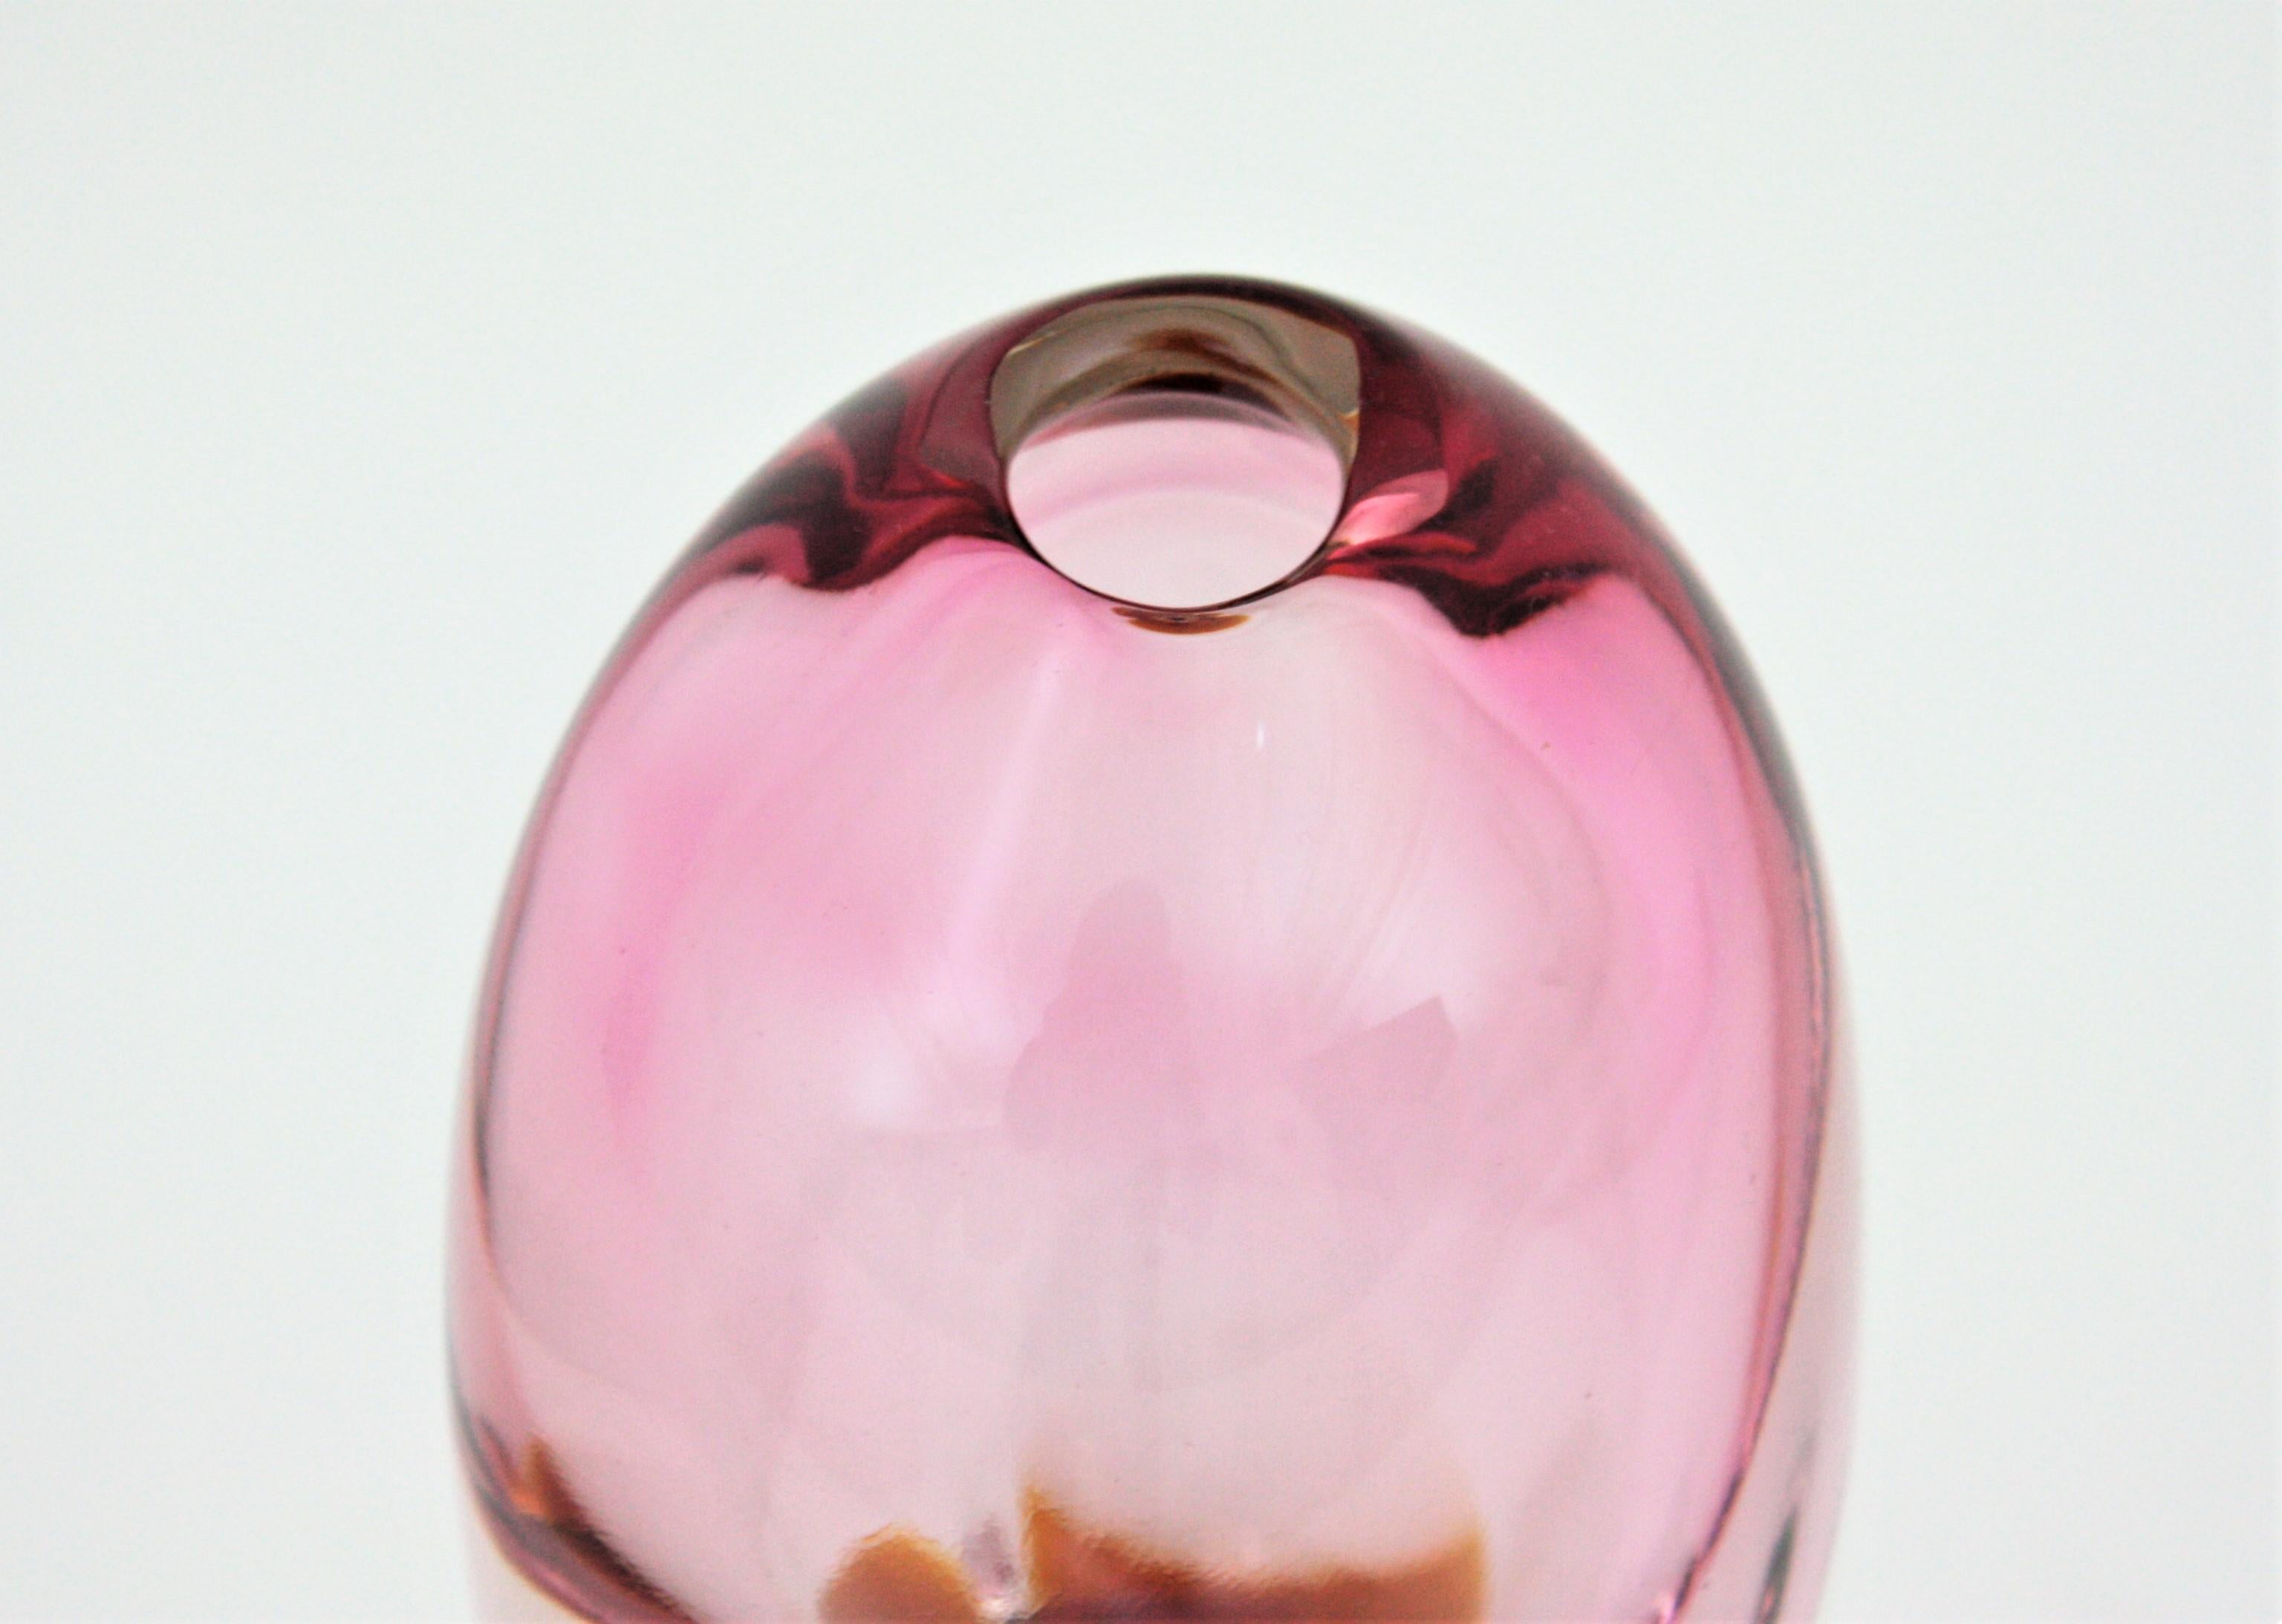 Art Glass Flavio Poli for Seguso Murano Sommerso Pink, Clear & Amber Art Glas Ovoid Vase